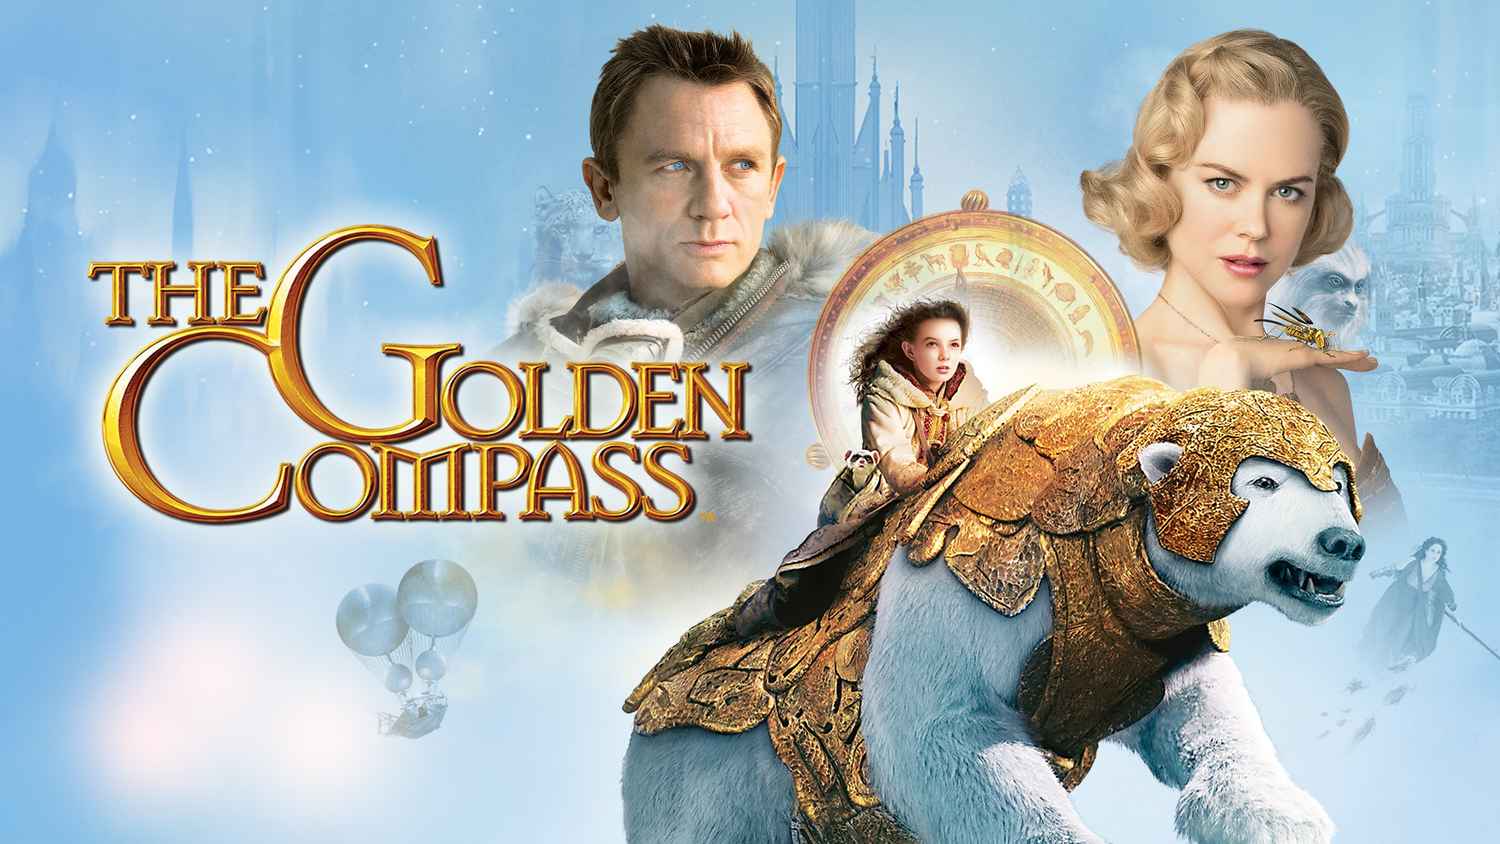 The golden compass full movie hd